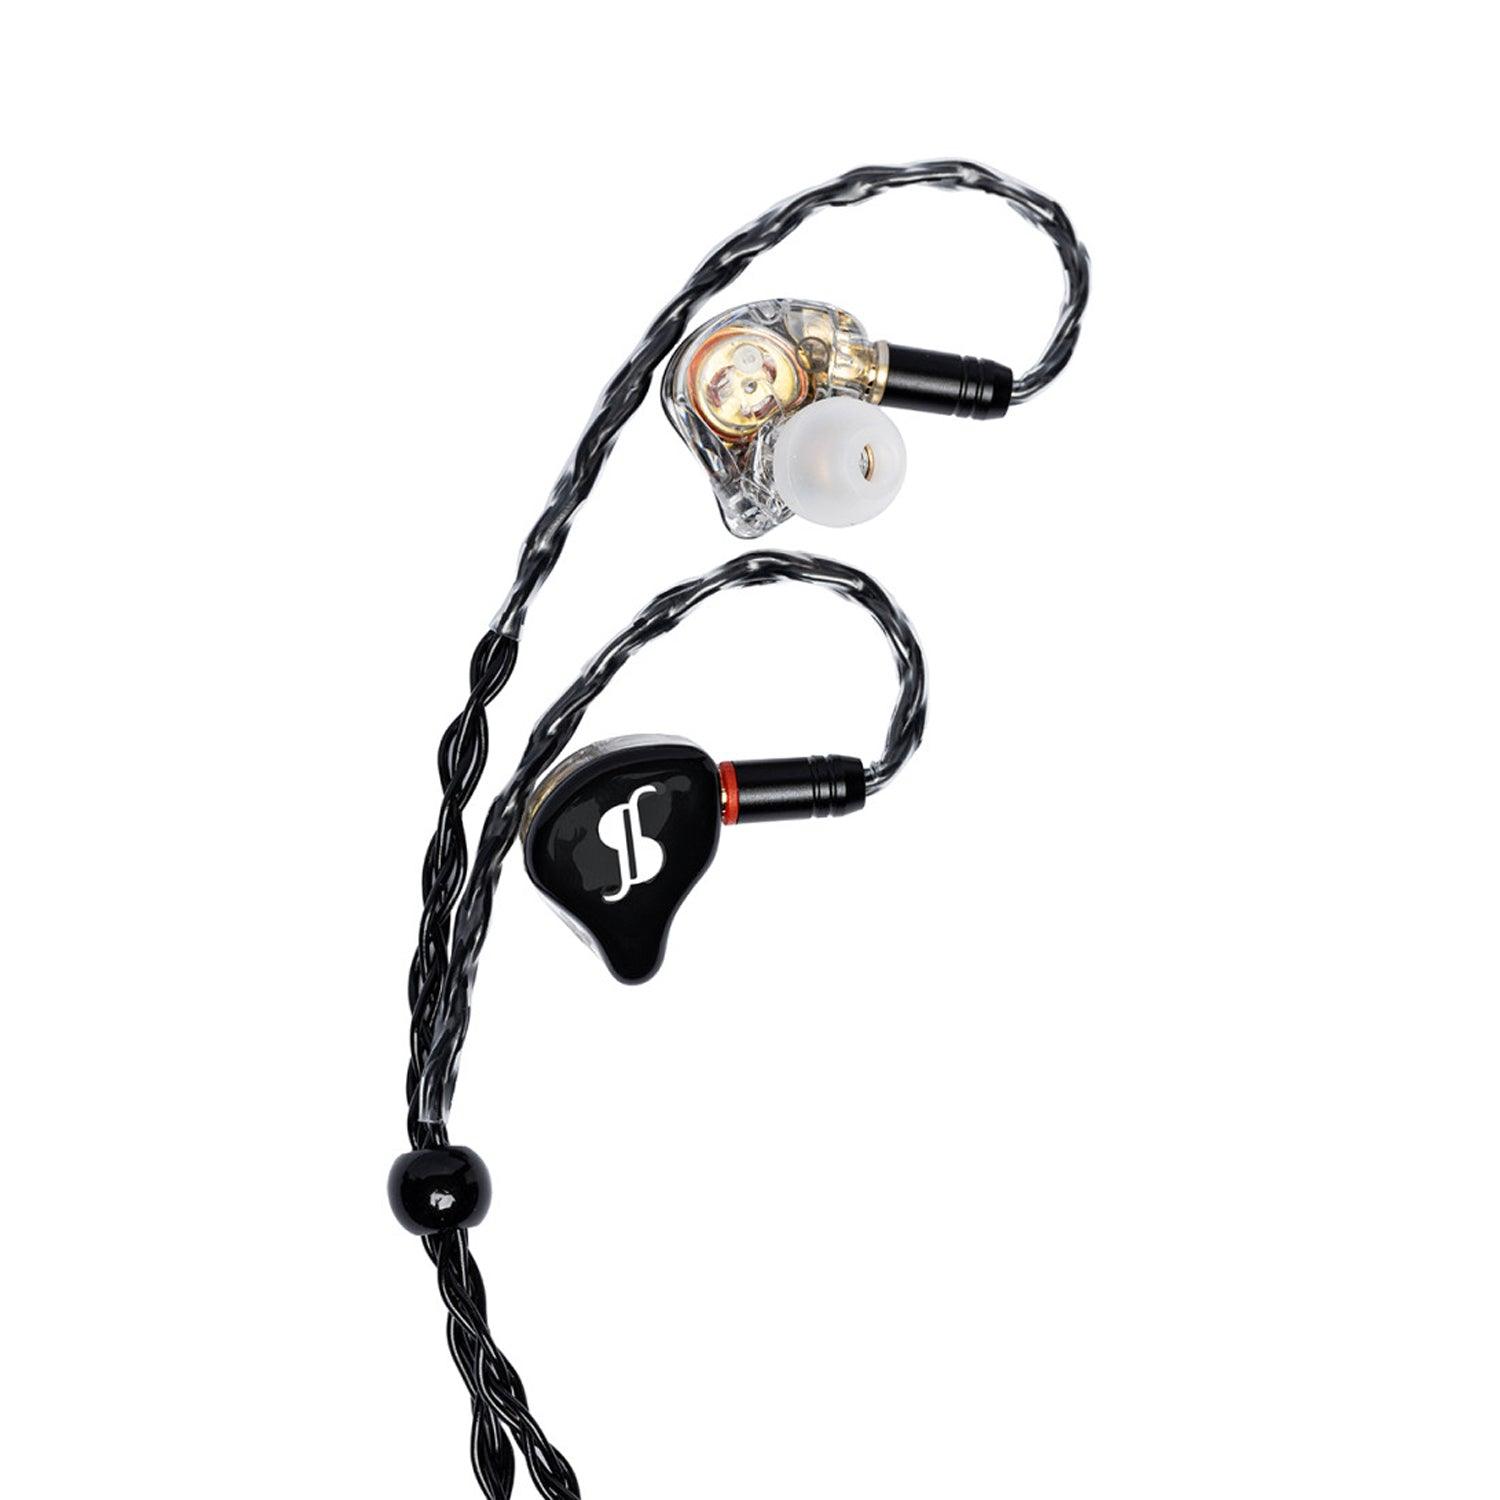 Stagg SPM-PRO BK Black Superior In Ear IEM Earphones with Premium Hybrid Transducers - DY Pro Audio